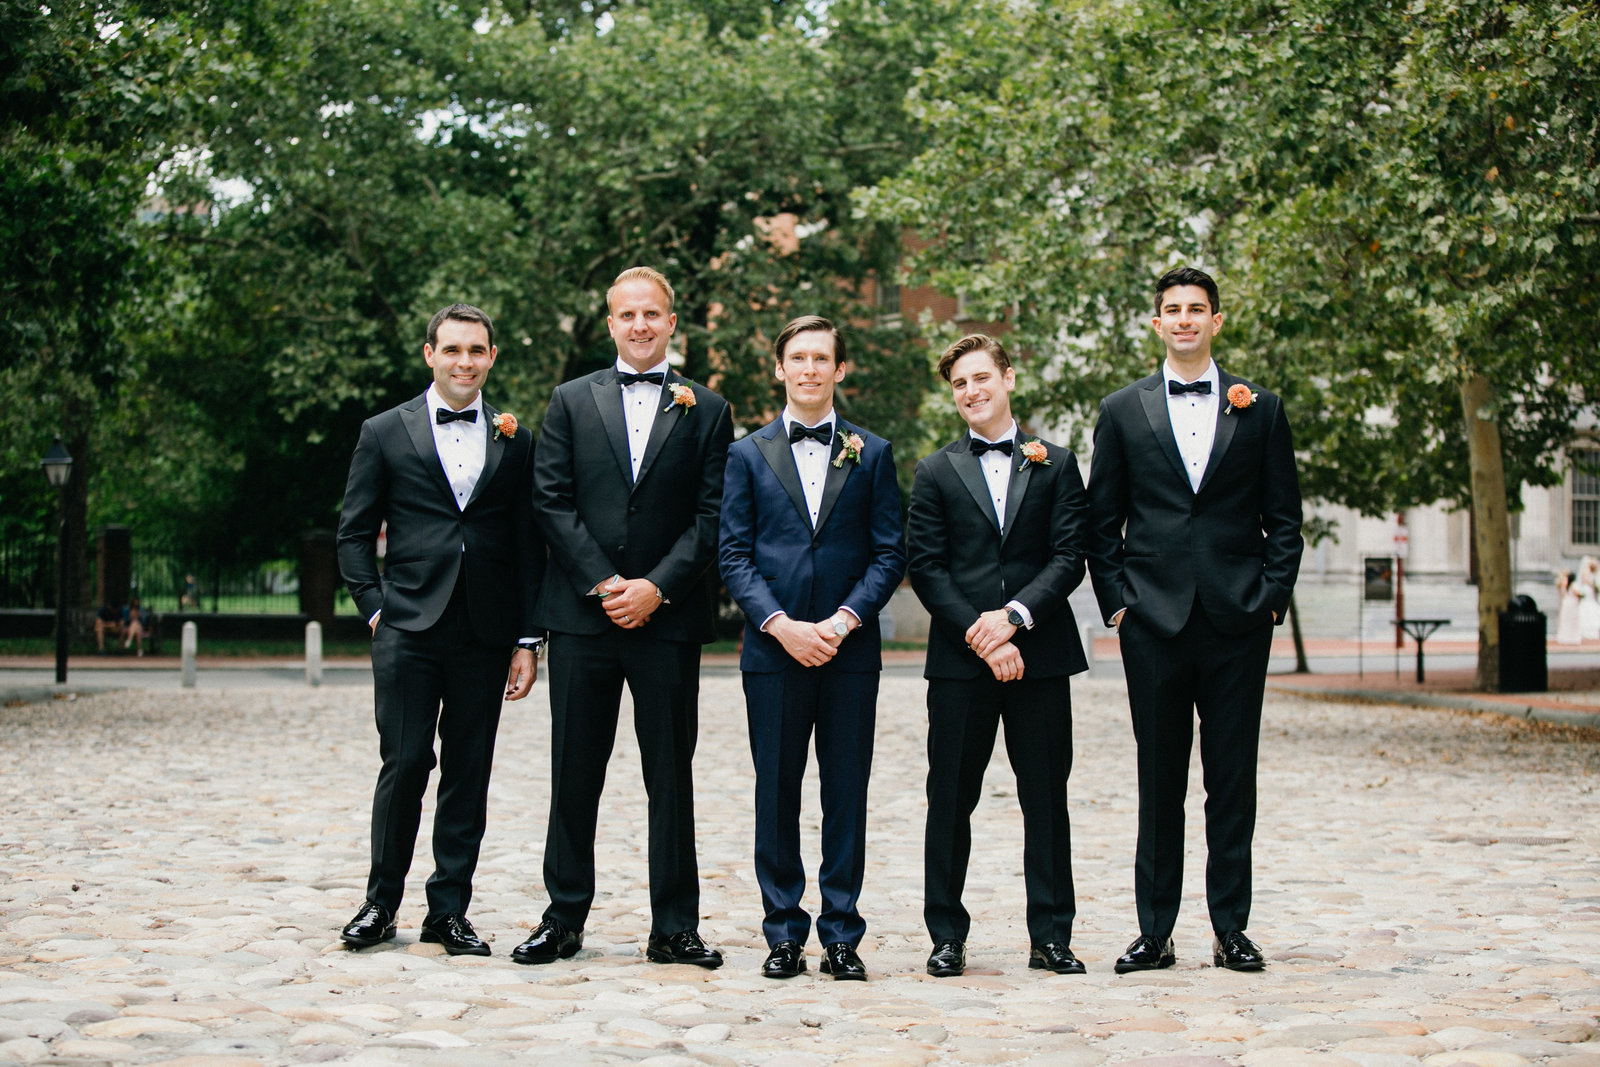 Groom and his guys photographed together in Old City, Philadelphia before the wedding festivities.